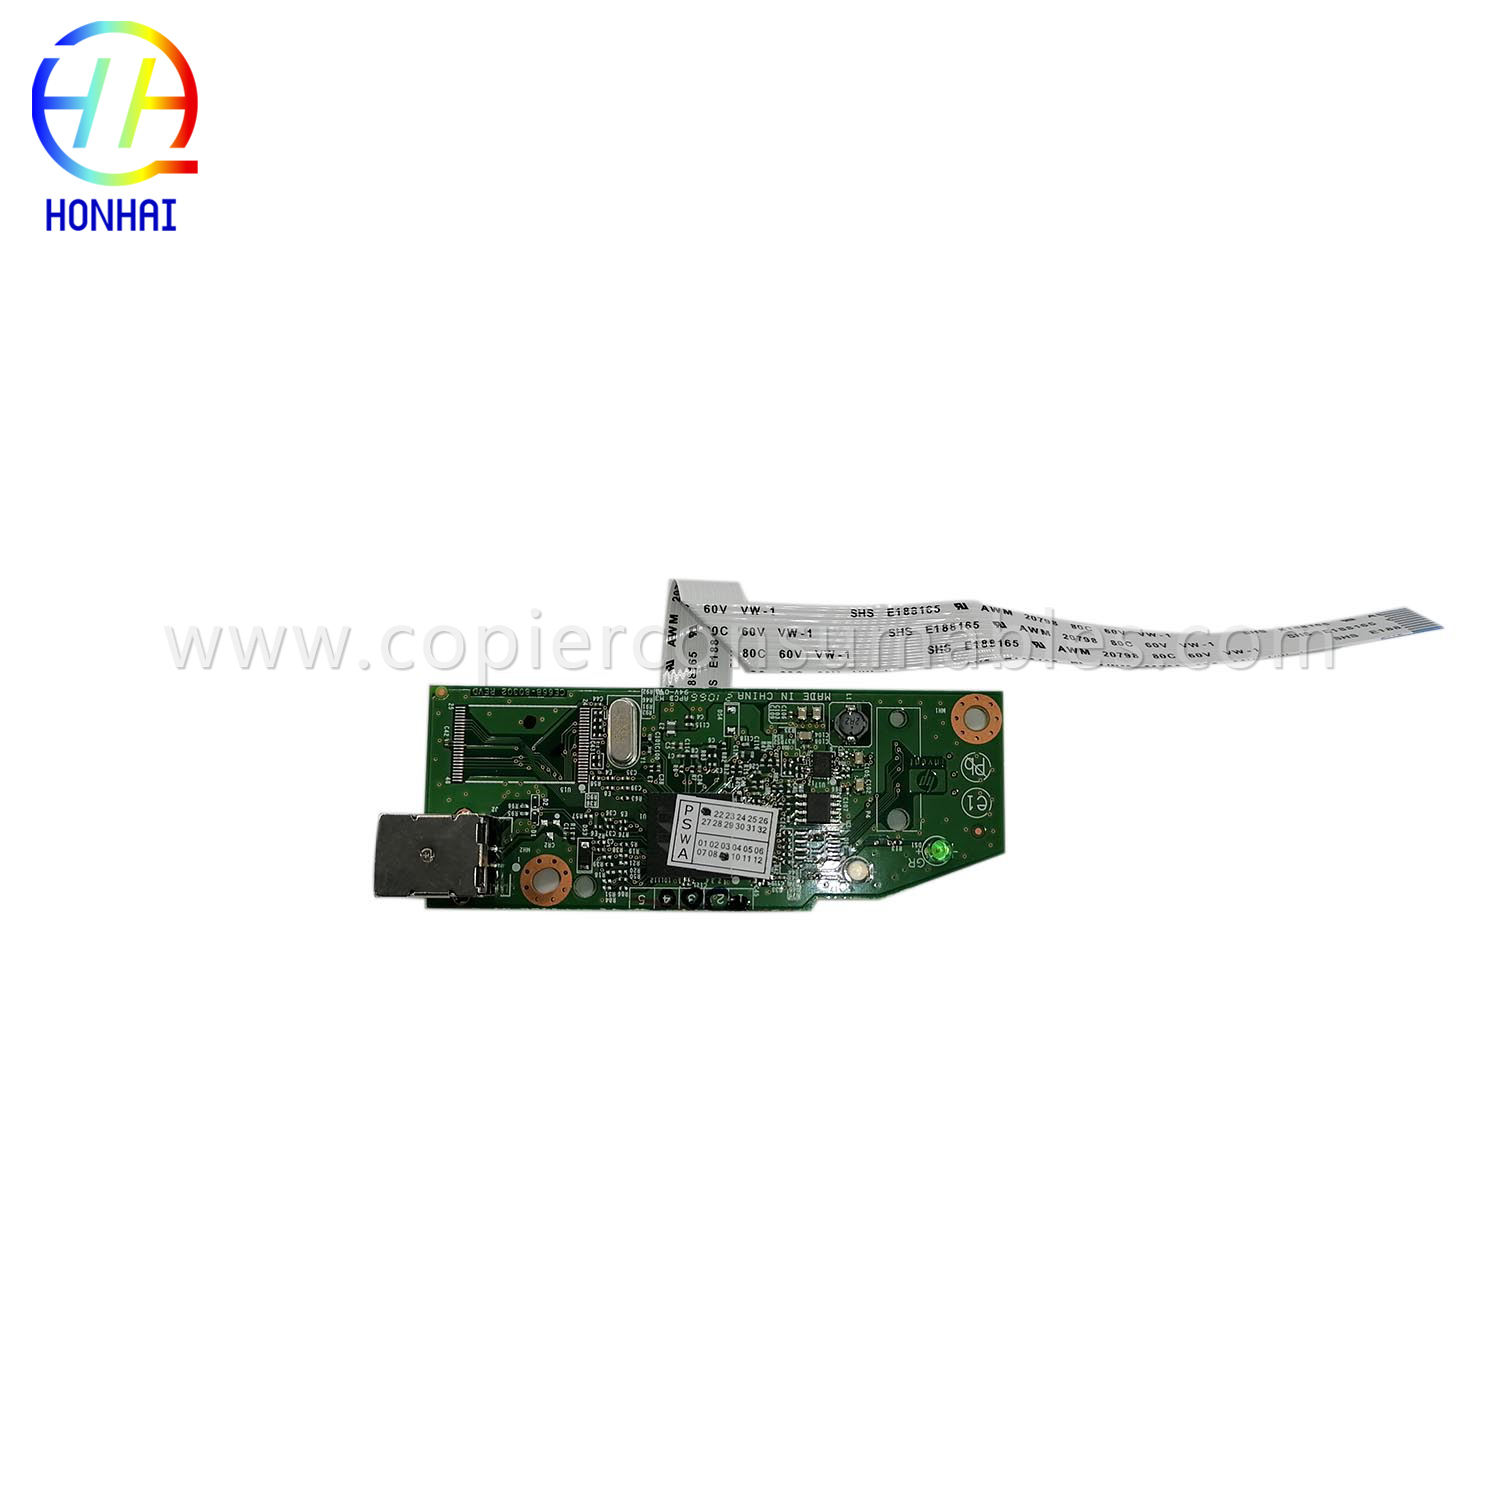 Main Board for HP Laser Jet 1102 RM1-7600-020CN